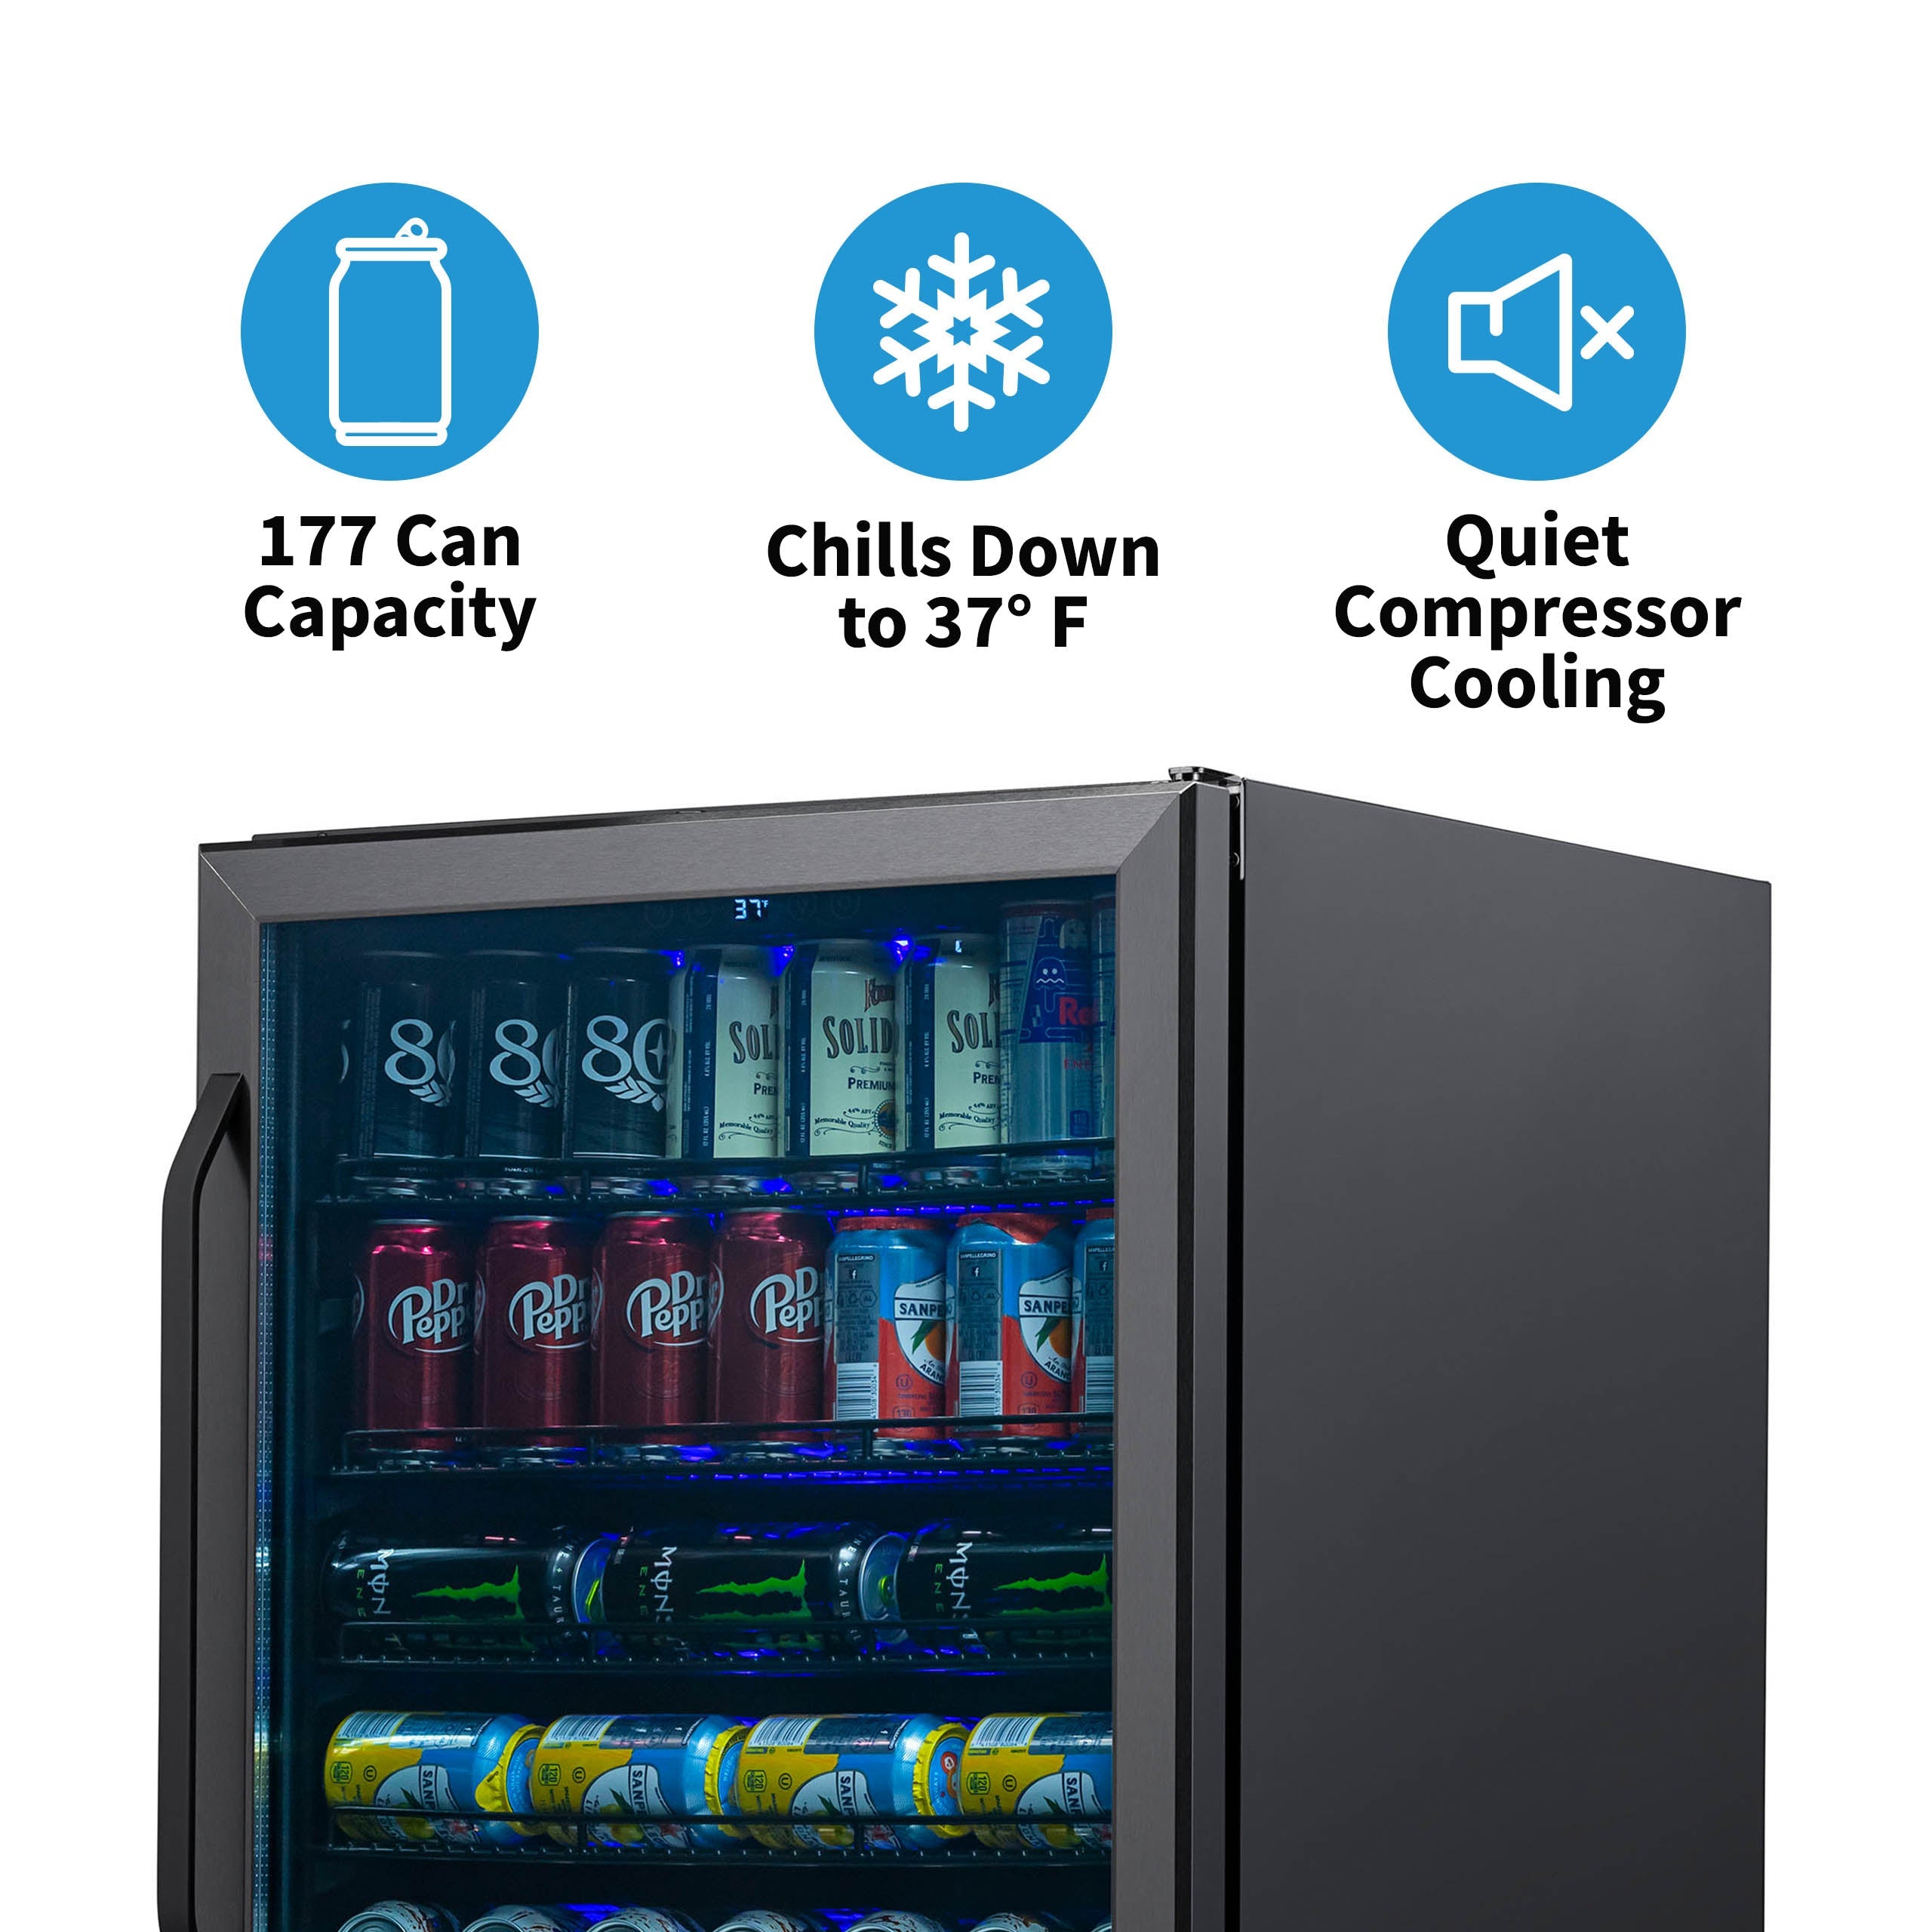 Newair - 24” 177 Can Built-in Beverage Center in Black Stainless Steel (NBC177BS00)